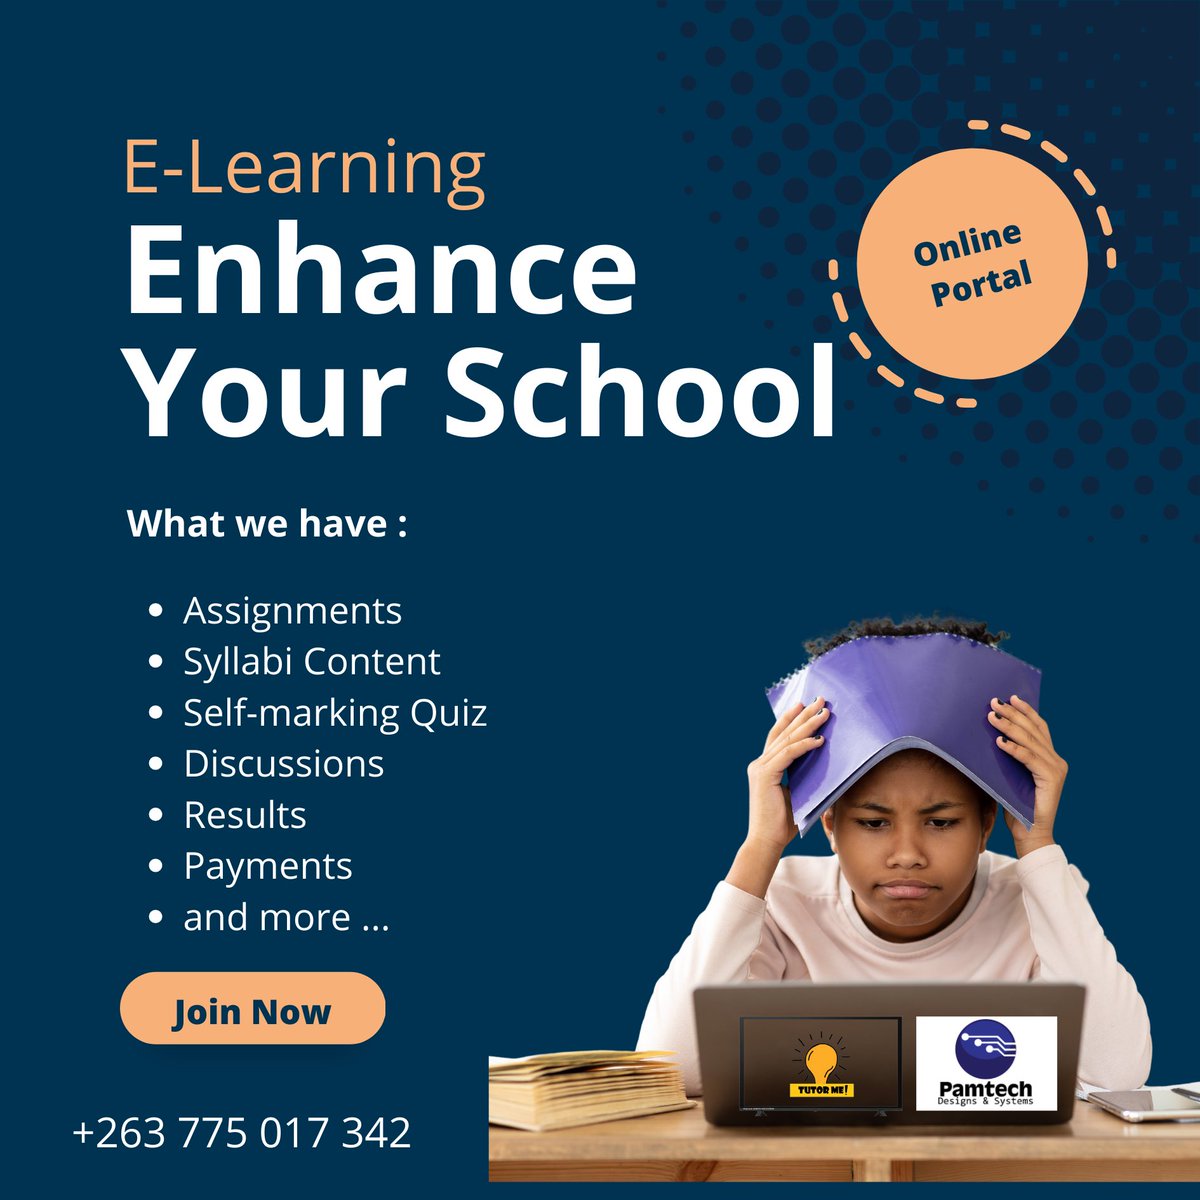 maProducts manyowani, 
Introducing our all-new Schools Portal – a dynamic platform for tailored content upload, assignments, self-marking quizzes, and seamless communication. Cambridge or Zimsec, we've got it covered! Elevate education with us. 🚀📚 #EdTechInnovation #Education